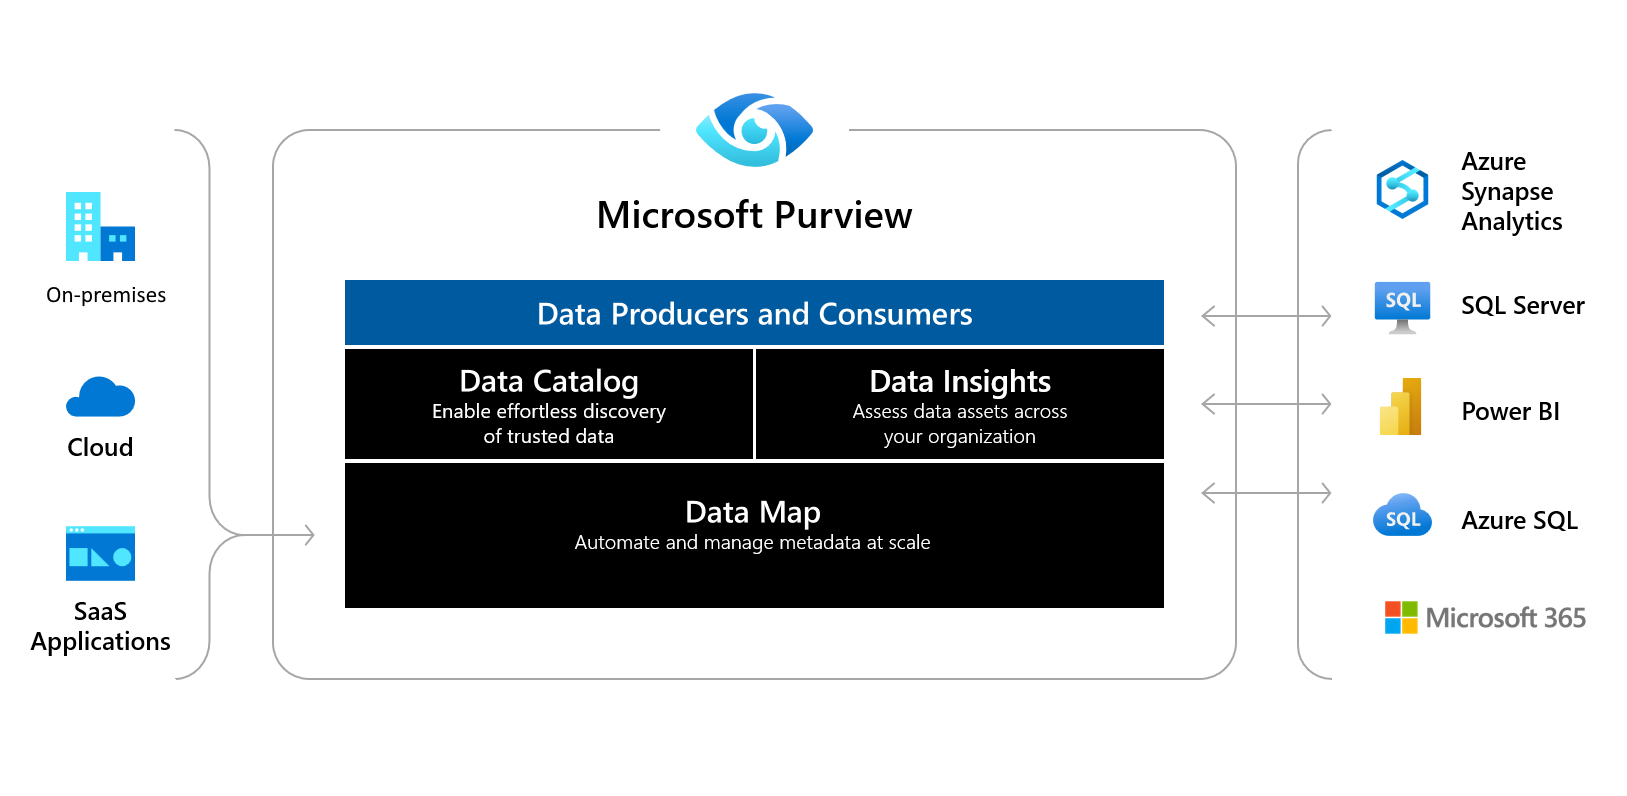 Diagram showing the capabilities of Microsoft Purview.